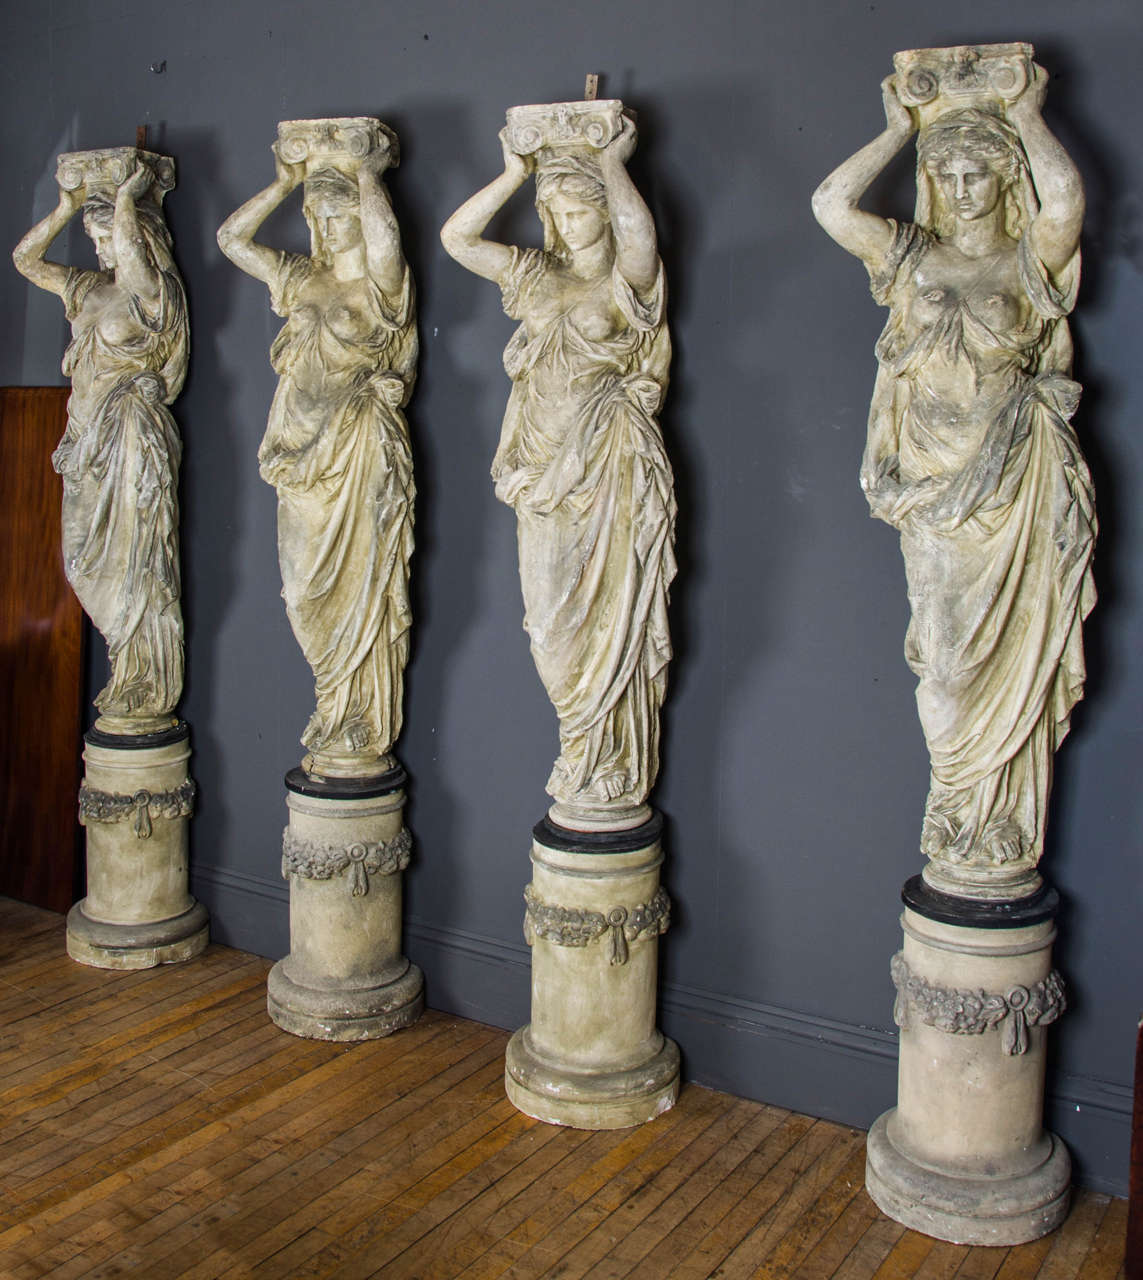 A beautiful and elaborate set of 4 caryatids of plaster construction depicting ancient classical Greek female figures supporting Corinthian capitals standing on decorated bases. Each figure measures 80 in – 203.2 cm in height, 19 in – 48.2 cm wide